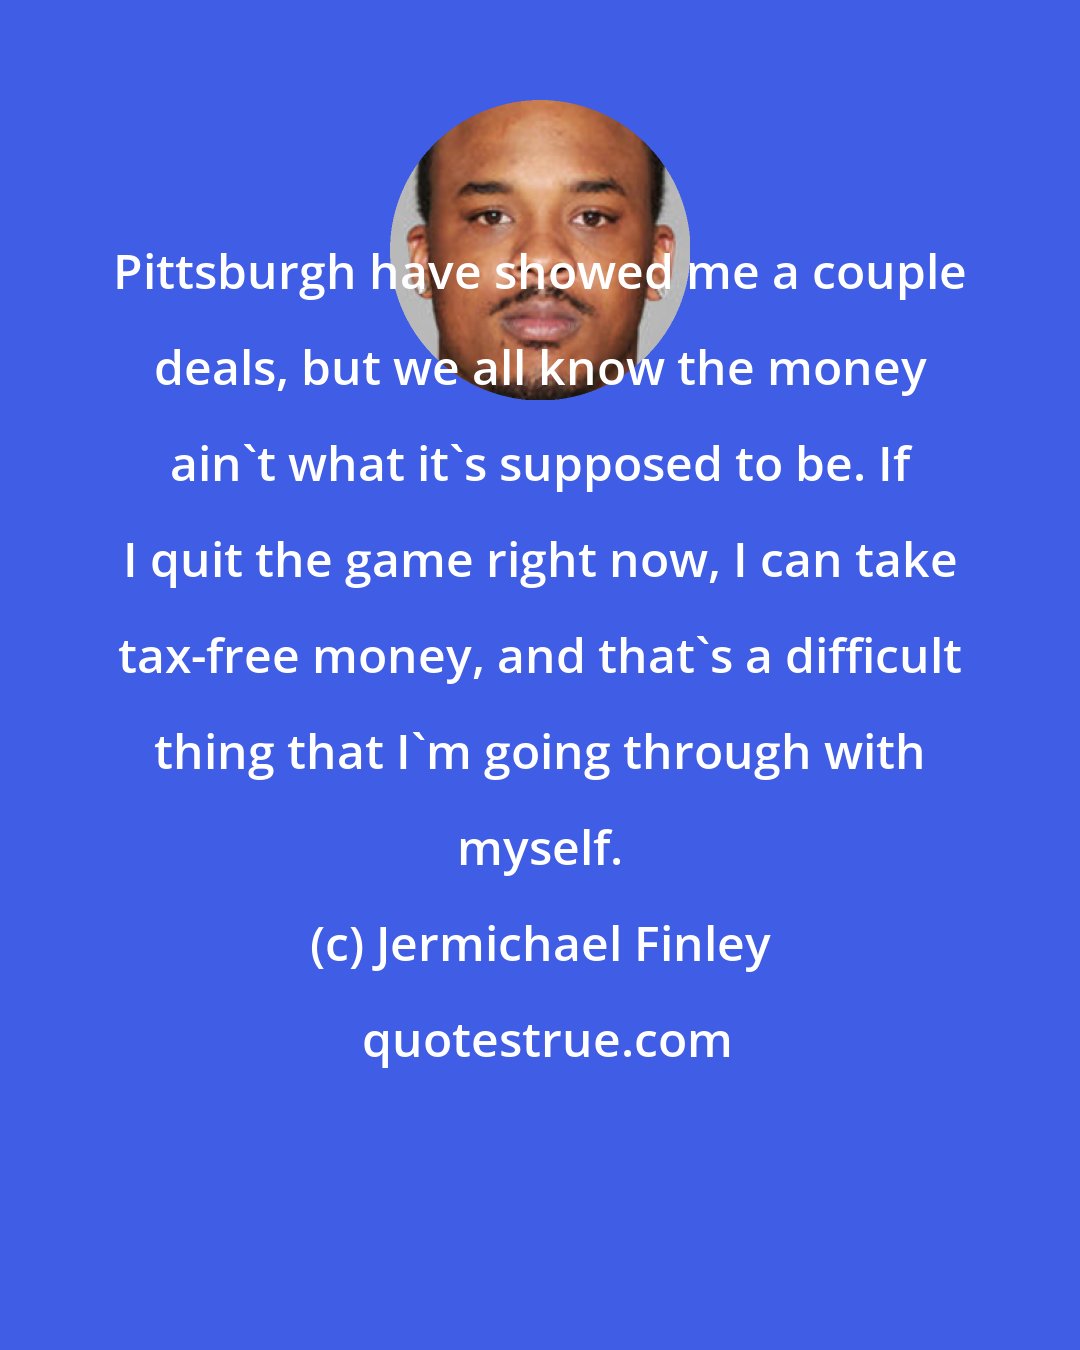 Jermichael Finley: Pittsburgh have showed me a couple deals, but we all know the money ain't what it's supposed to be. If I quit the game right now, I can take tax-free money, and that's a difficult thing that I'm going through with myself.